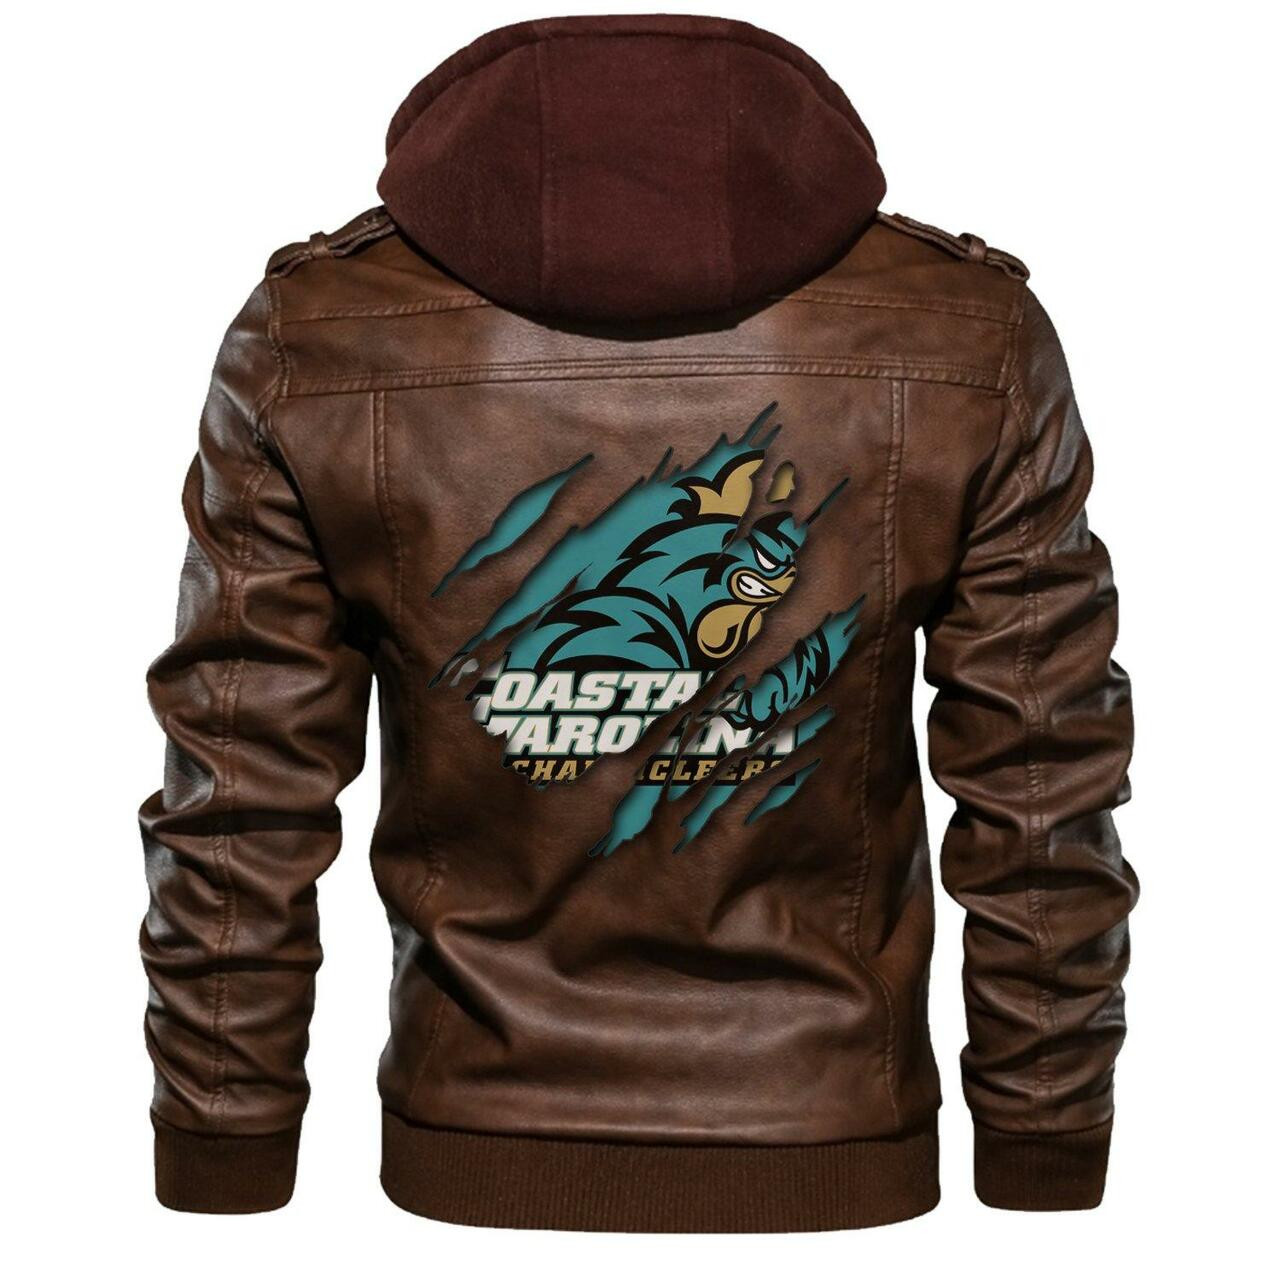 You can find Leather Jacket online at a great price 164